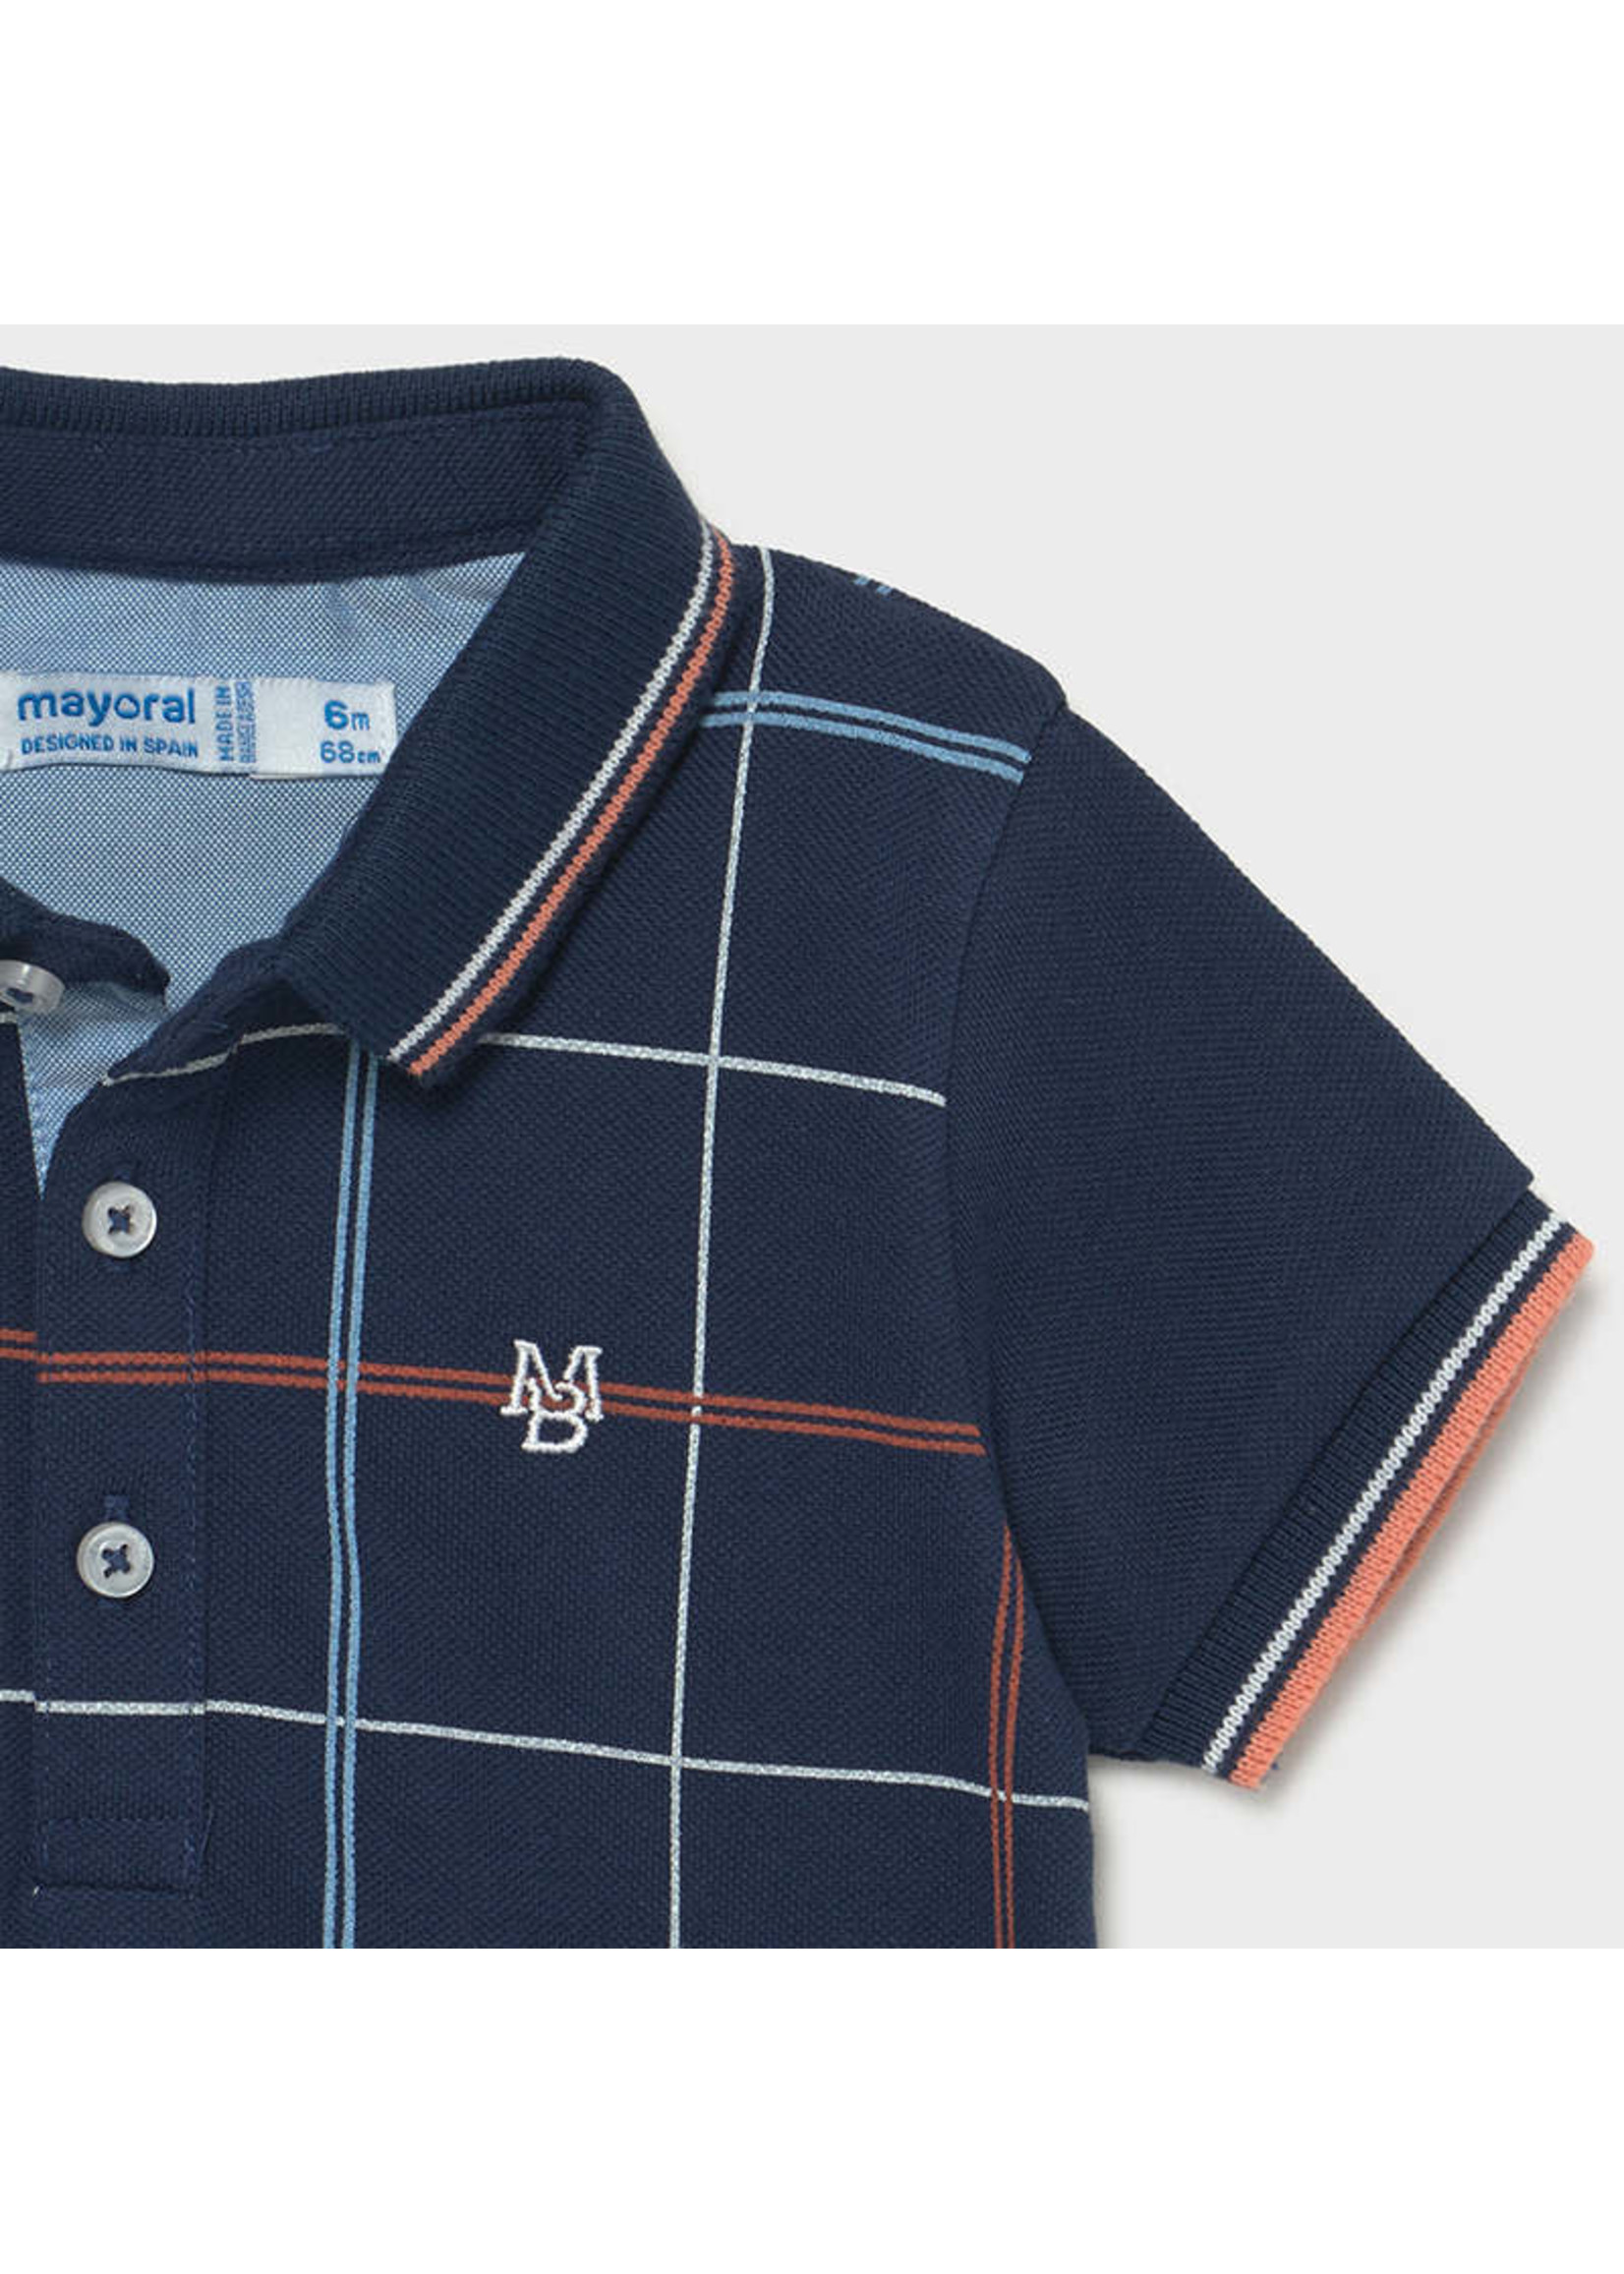 Mayoral Mayoral s/s plaid polo blue - 21 01106